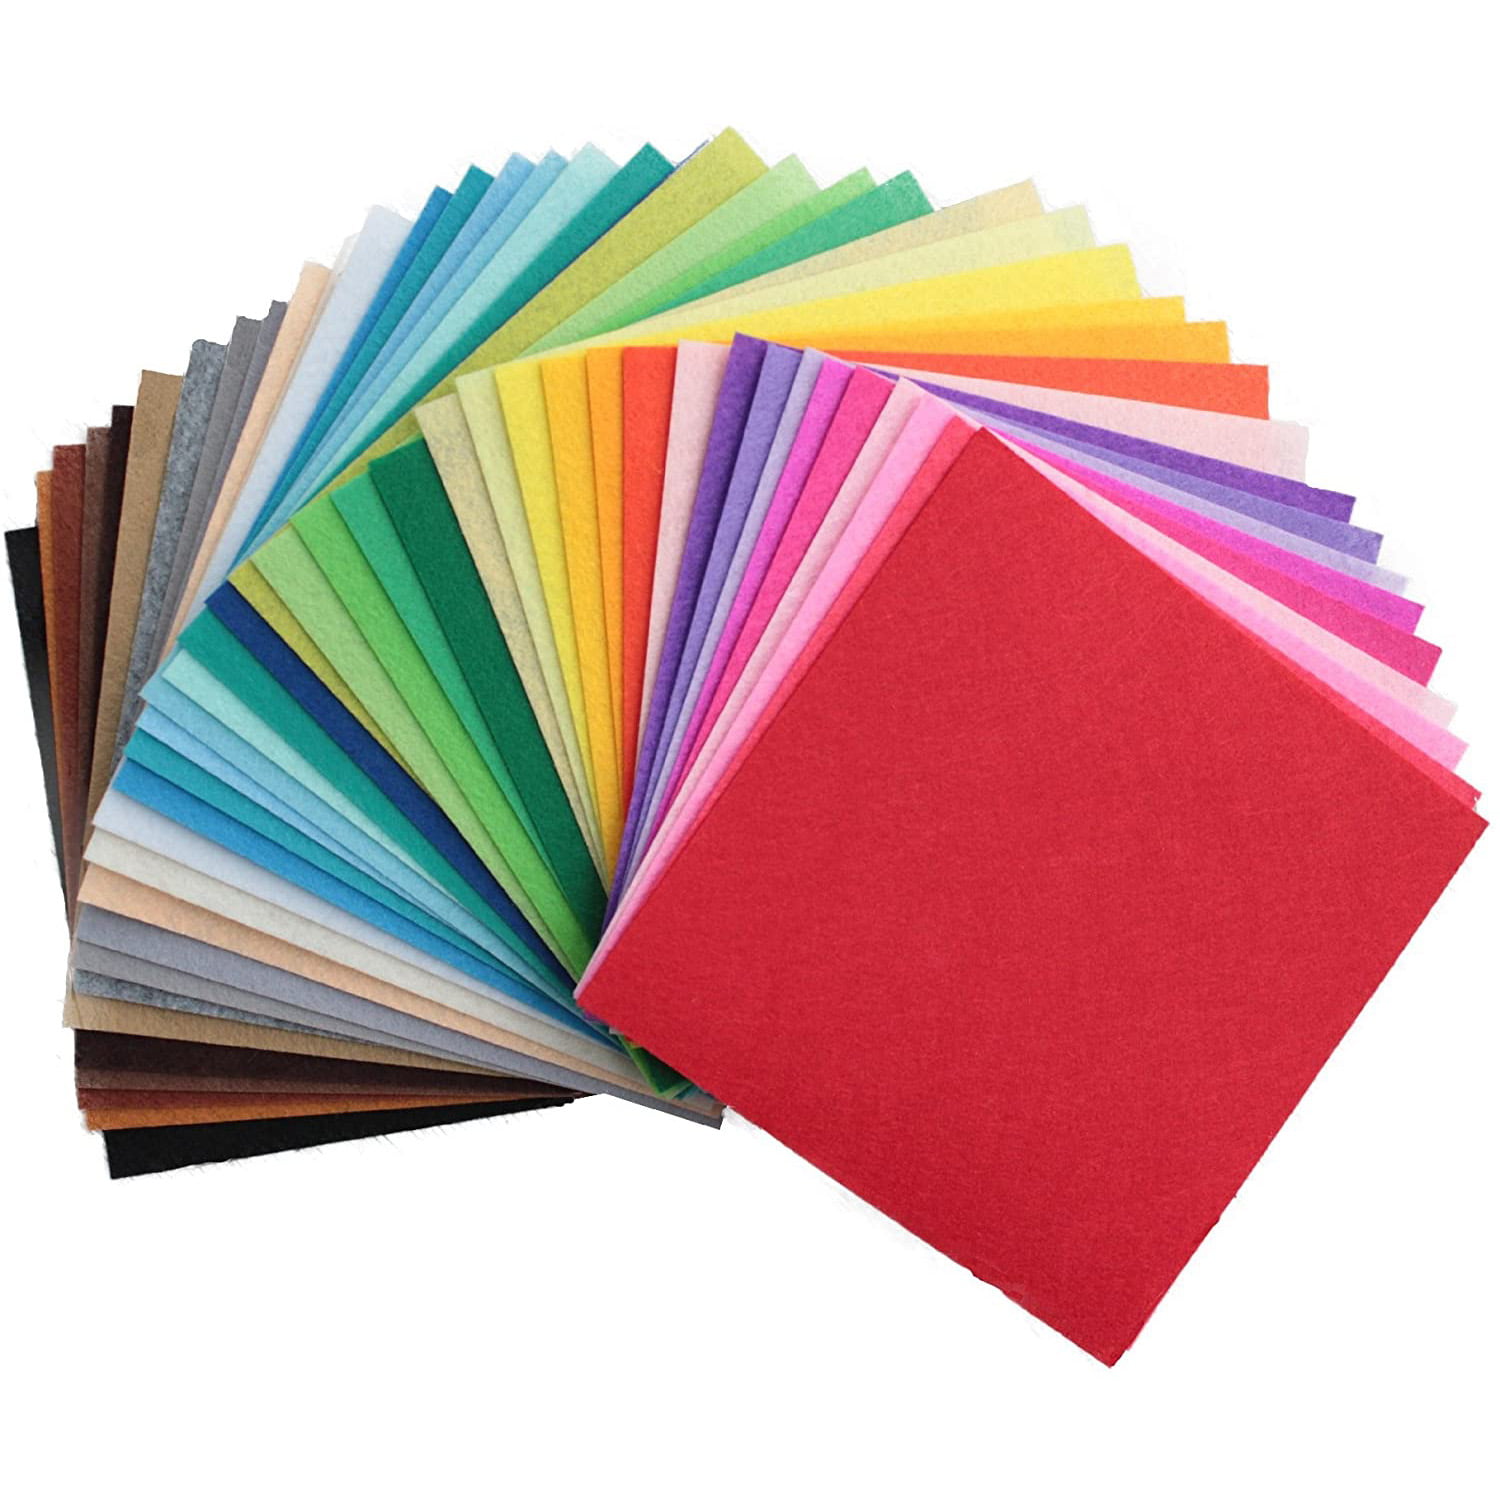 Life Glow 40 Pcs 12 x 12 inch Stiff Felt Fabric Sheets, Assorted Colors Non Woven Felt Sheets, Thick Felt Fabric Square for Kids, DIY Sewing Crafts